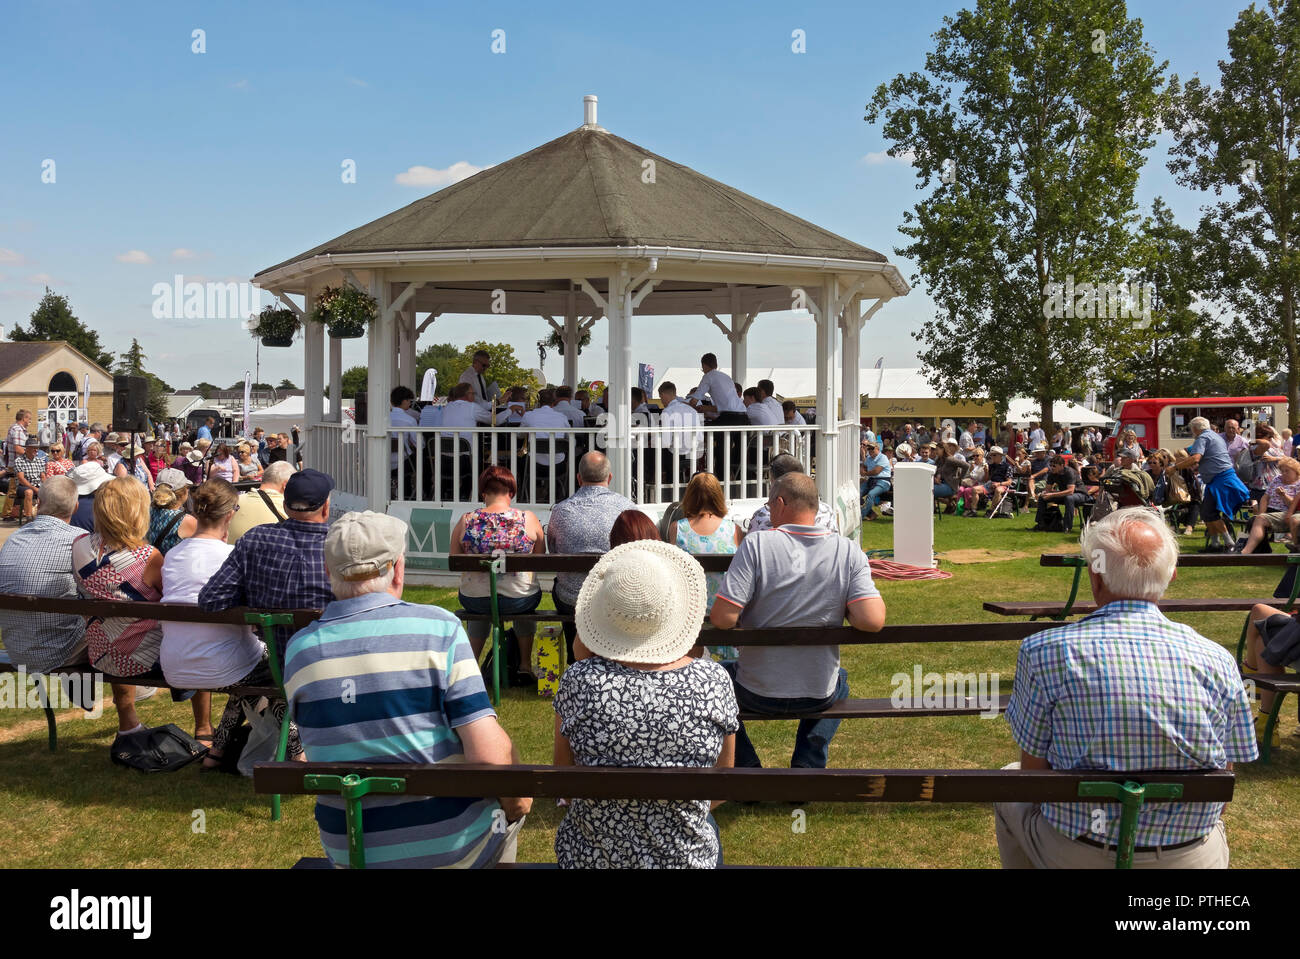 People listening to band playing music at the Great Yorkshire Show in summer Harrogate North Yorkshire England UK United Kingdom GB Great Britain Stock Photo